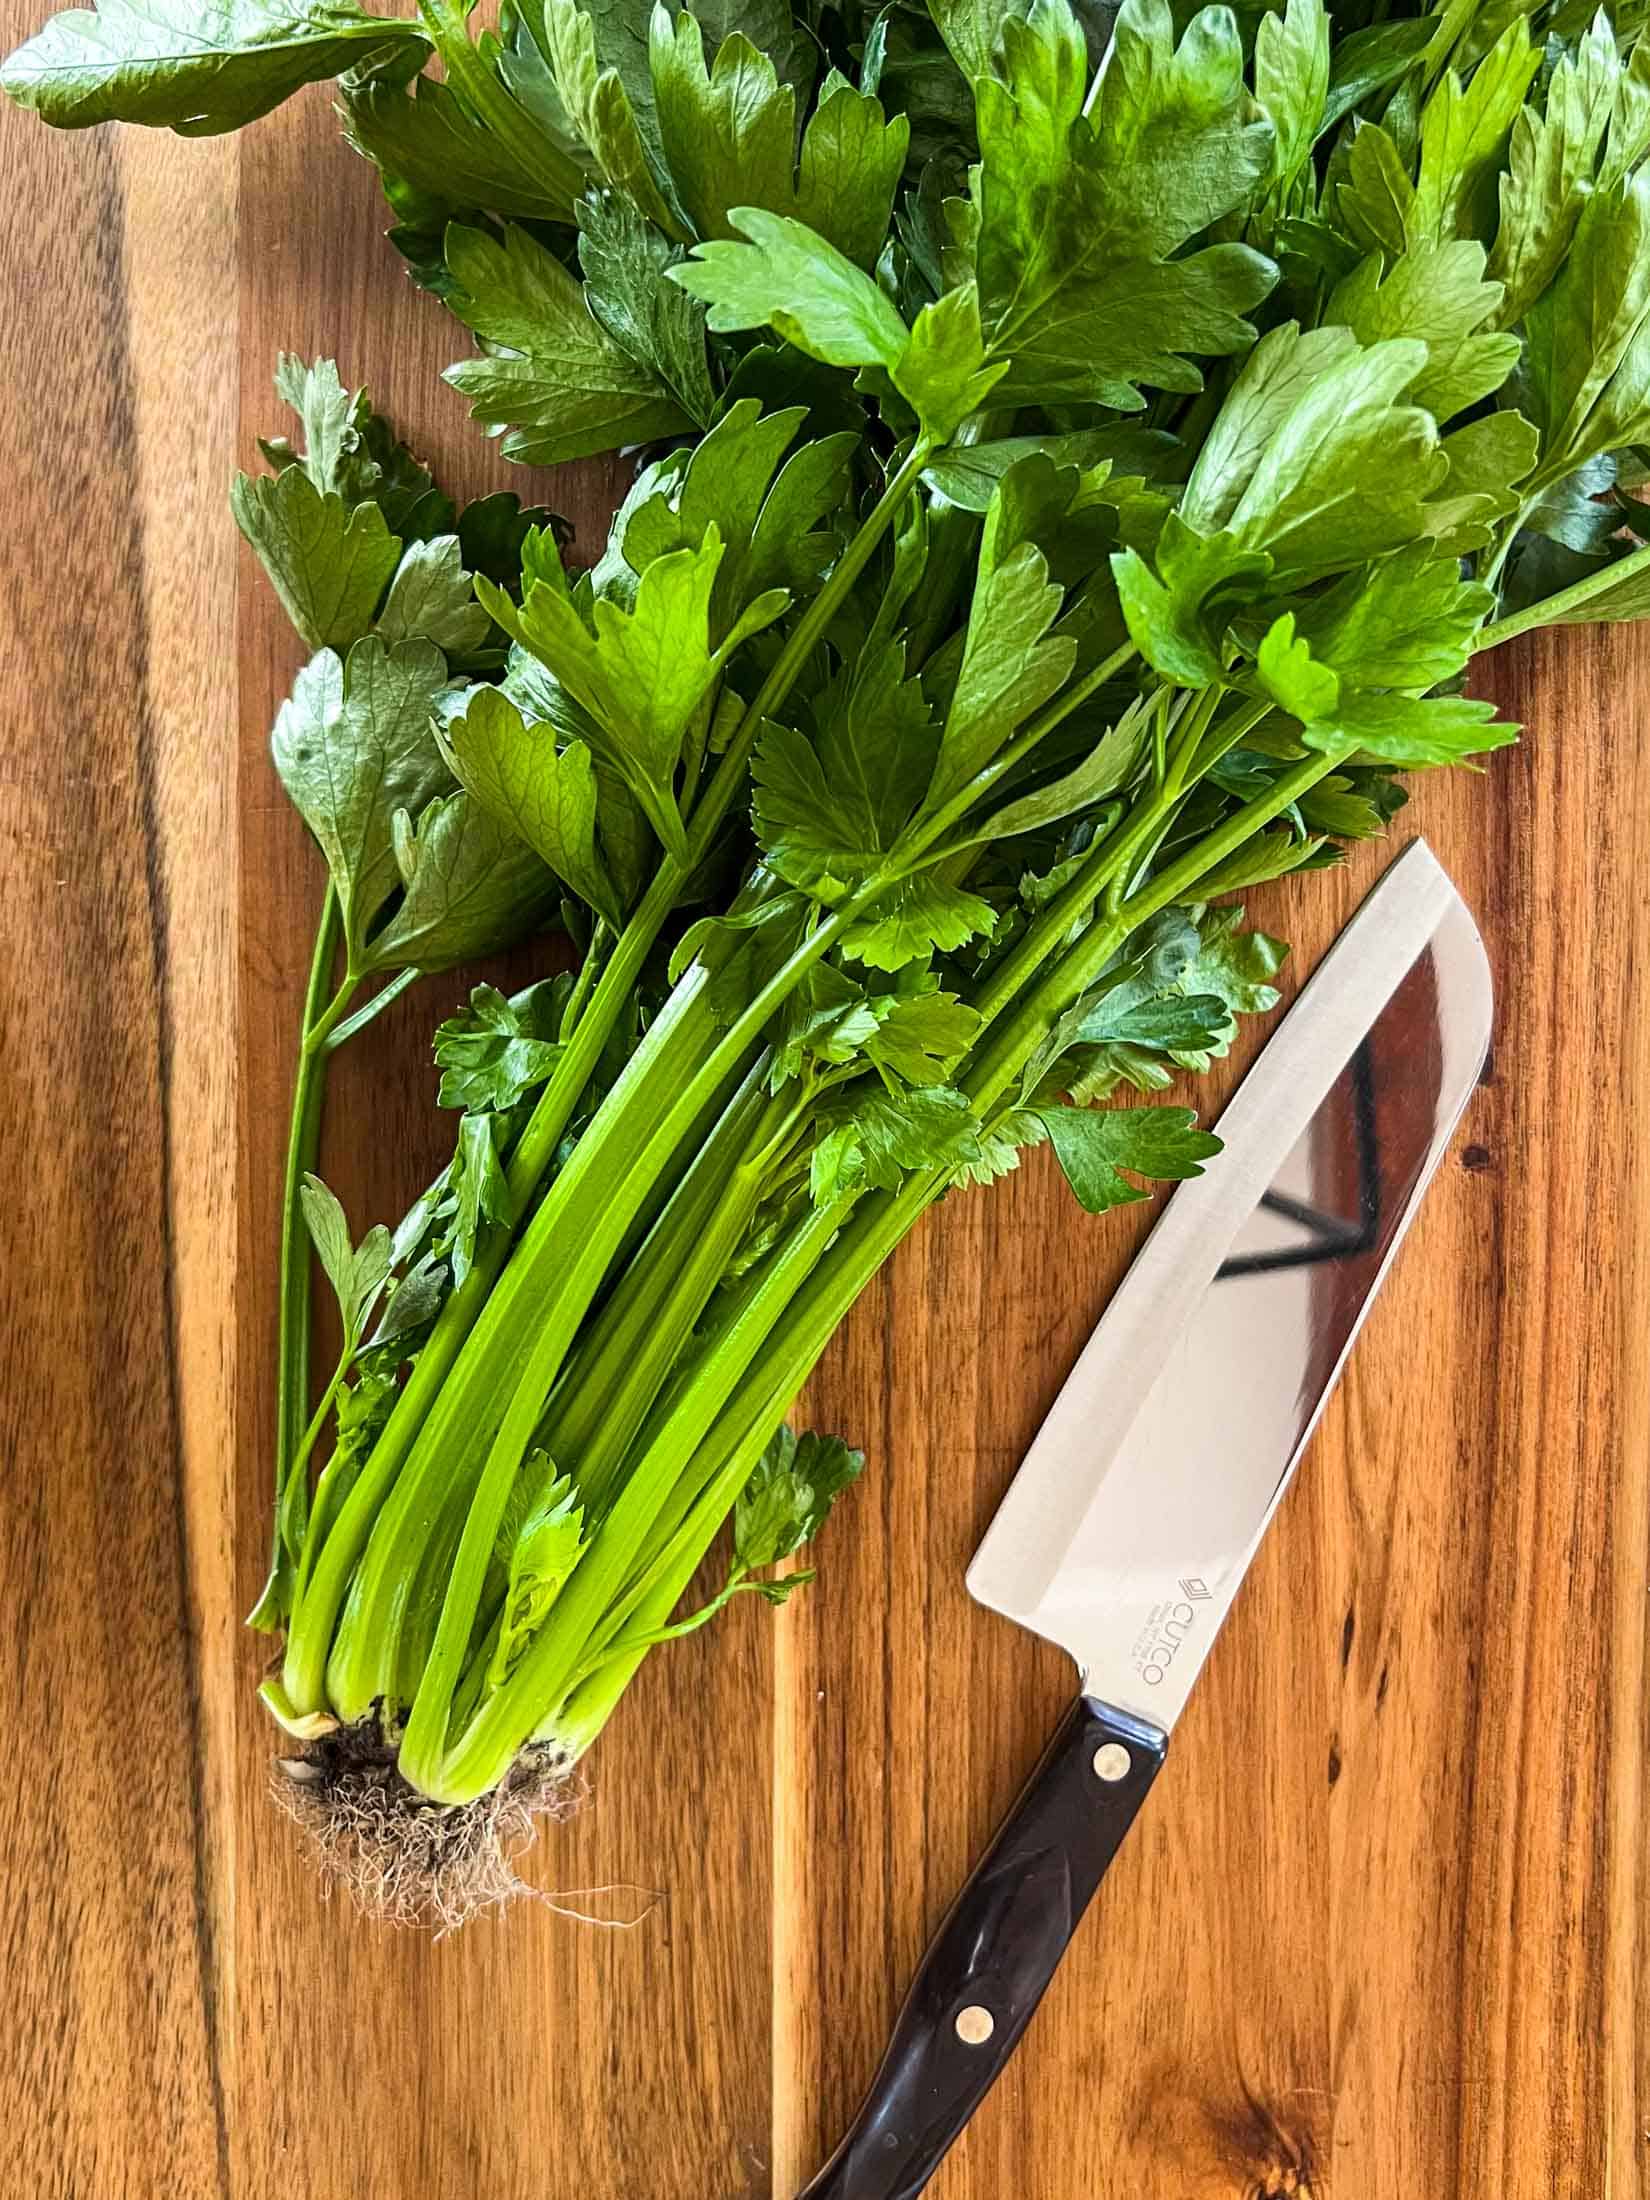 A large bunch of celery on a wooden cutting board with a chef's knife beside.